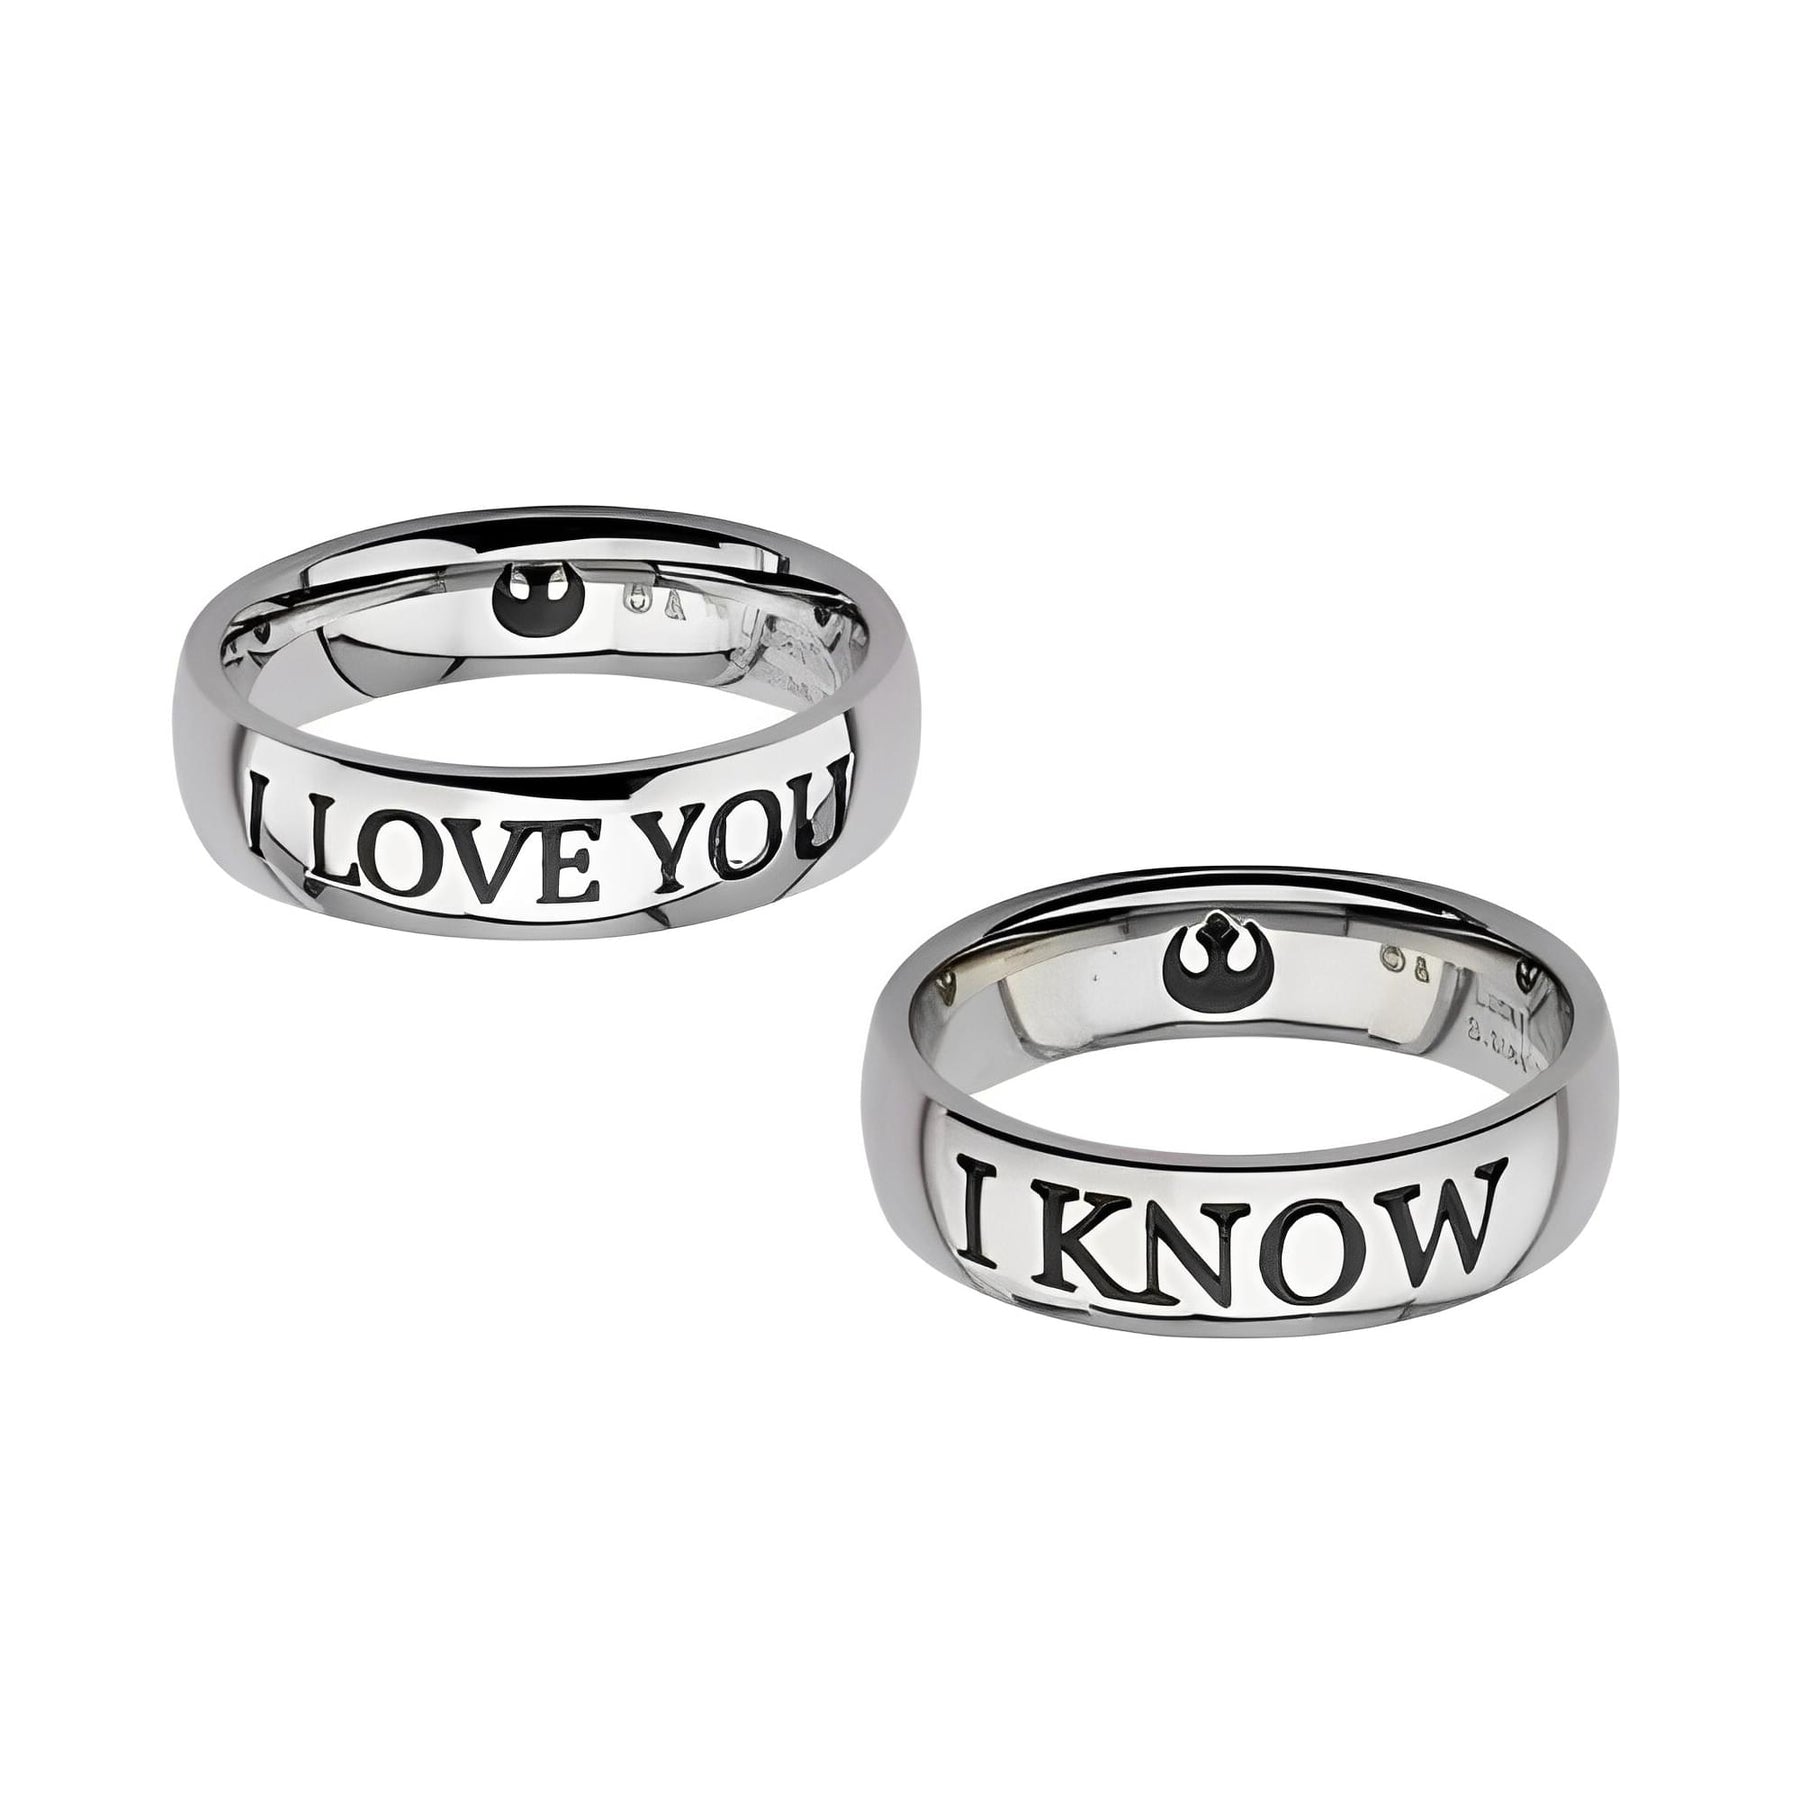 Star Wars "I Love You" / "I Know" Ring Set, Women's Size 7, Men's Size 10